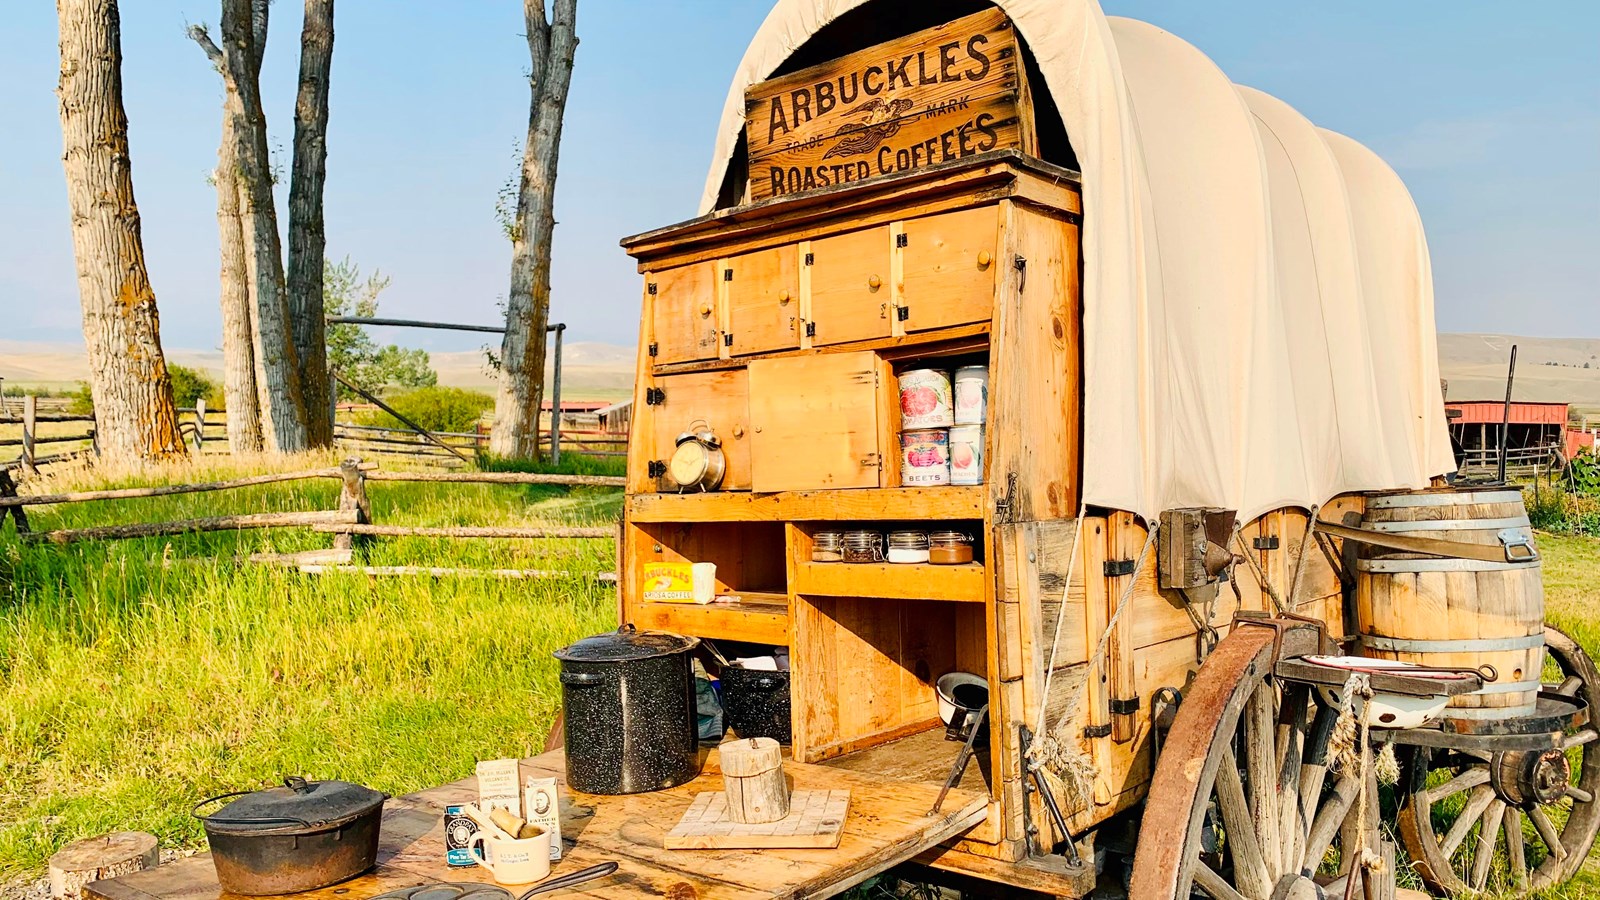 A view of a canvas covered chuckwagon. The back pantry box is open revealing a table and shelves